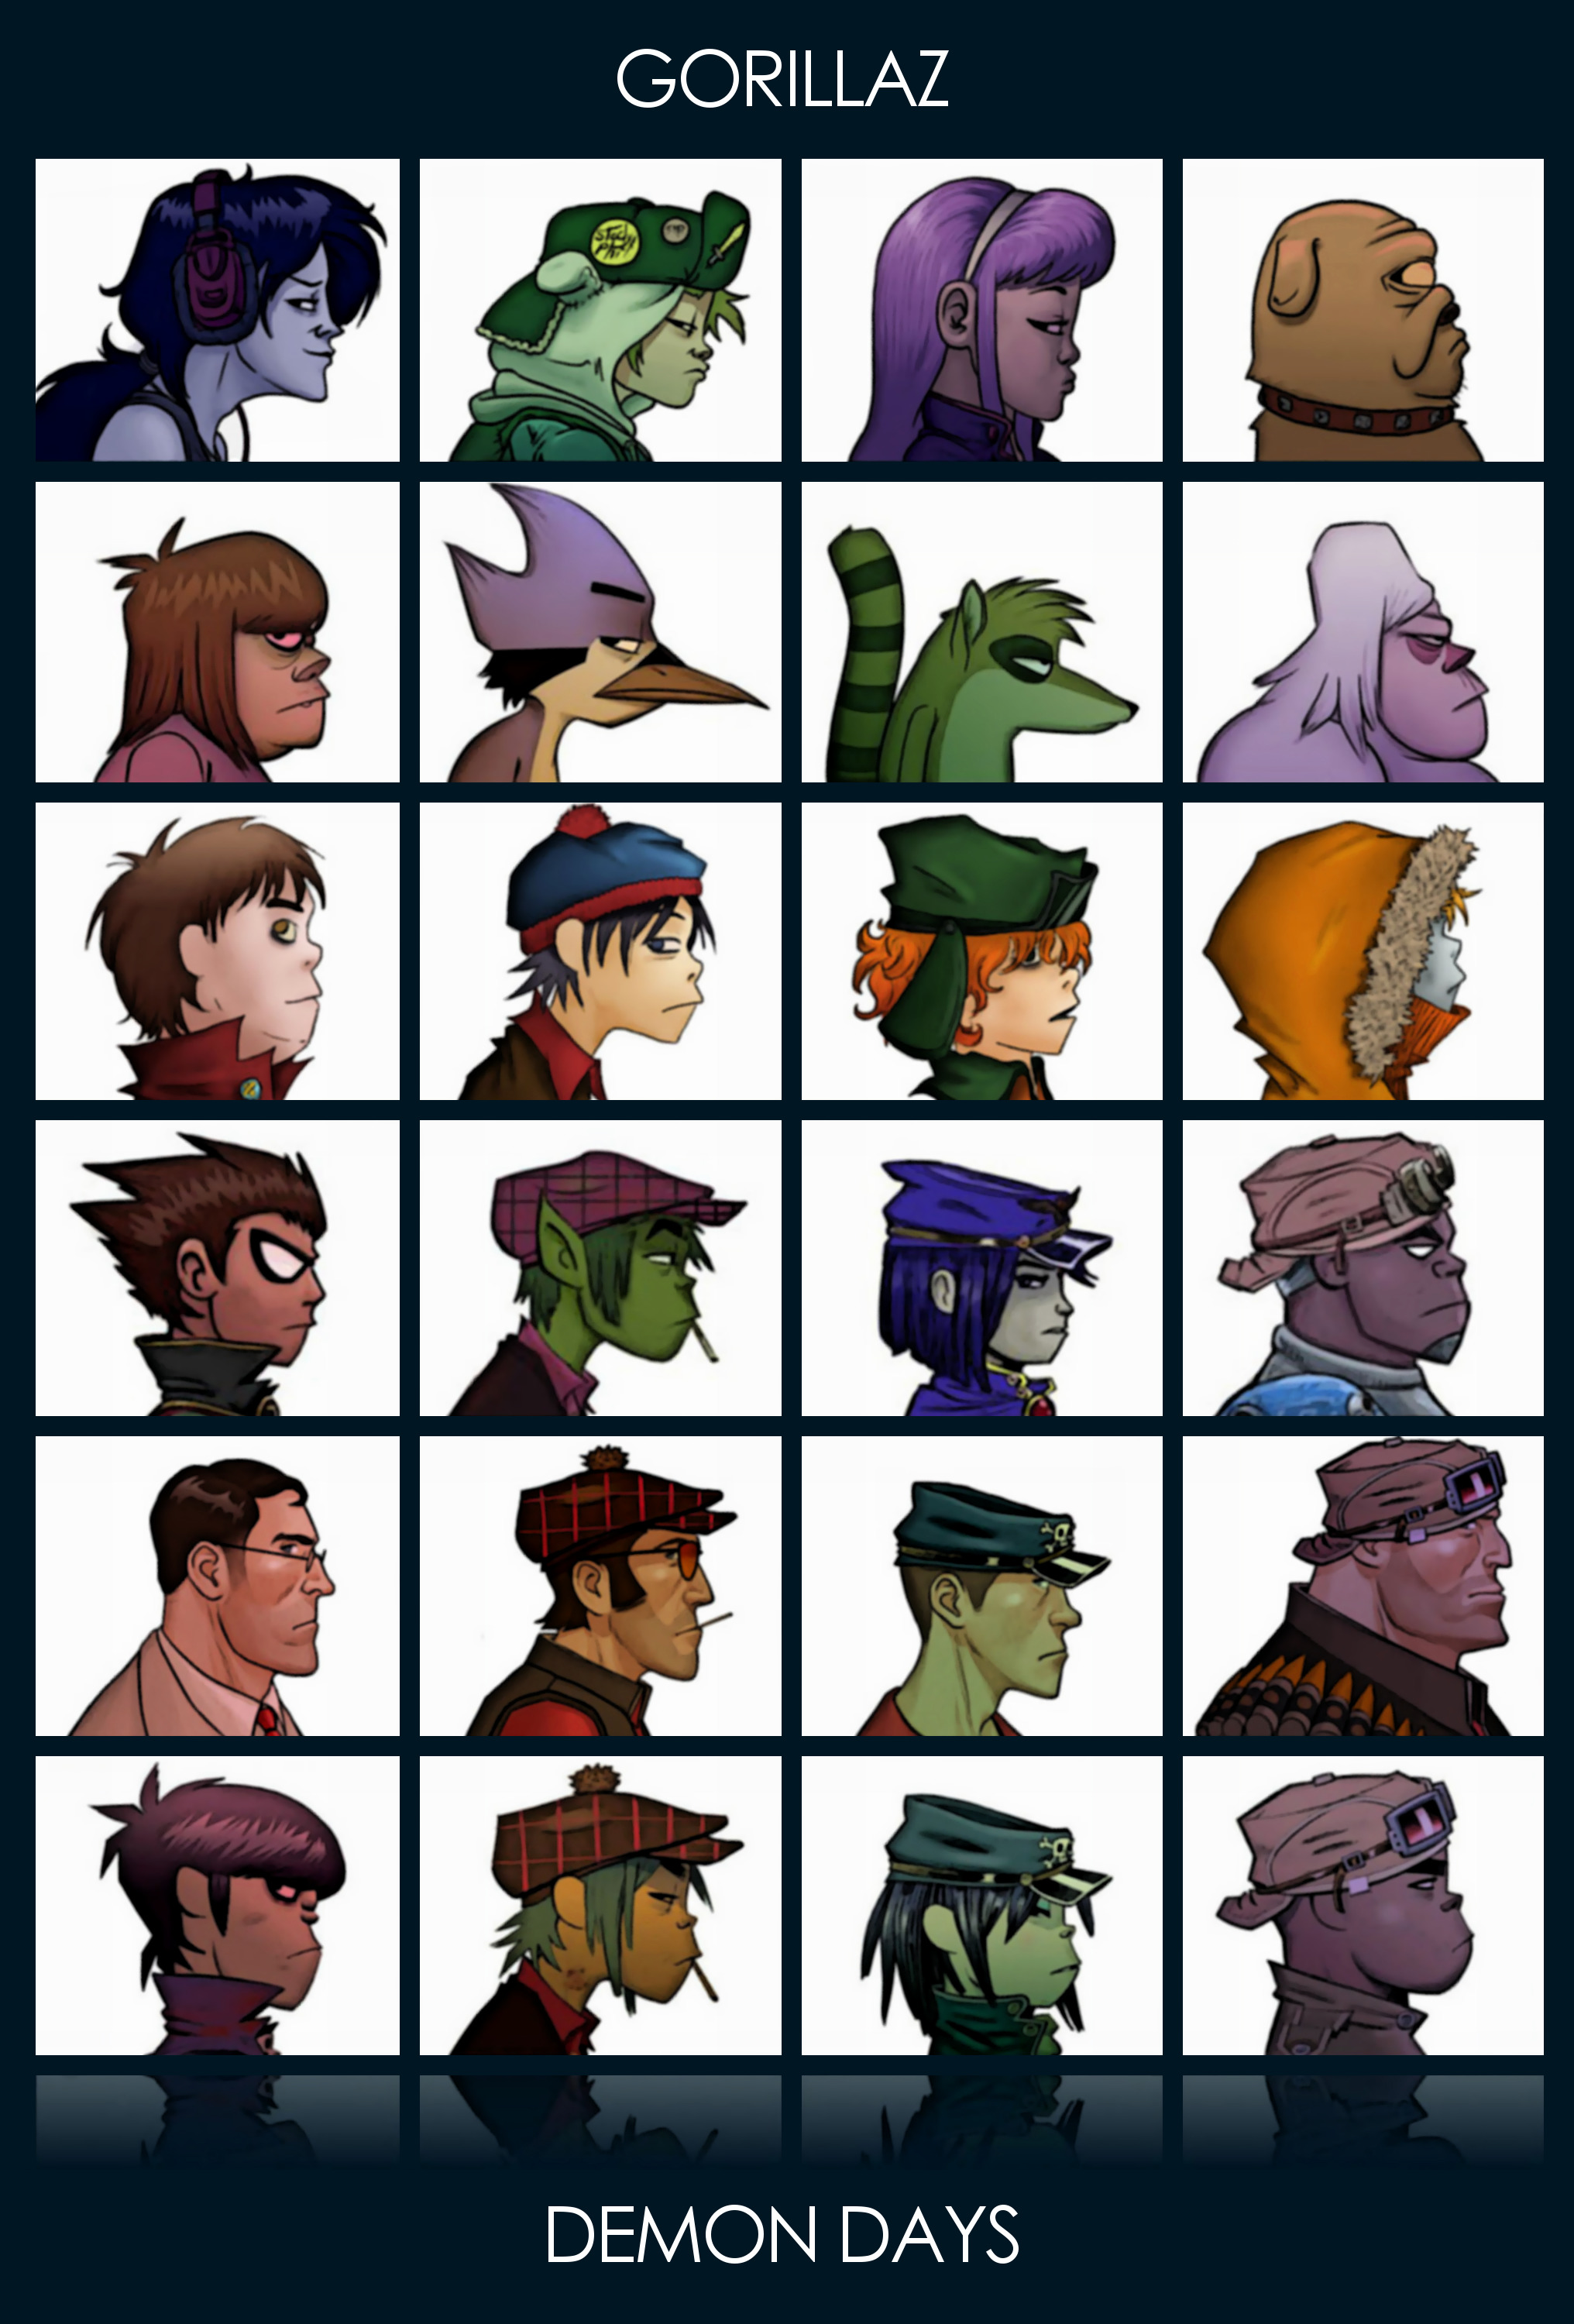 Gorillaz, Adventure Time, Regular Show, South Park, Vertical, Teen Titans, Team Fortress 2, Crossover, Medic, Sniper (TF2), Heavy (charater), Murdoc Niccals, 2 D, Noodle, Russel Hobbs Wallpaper